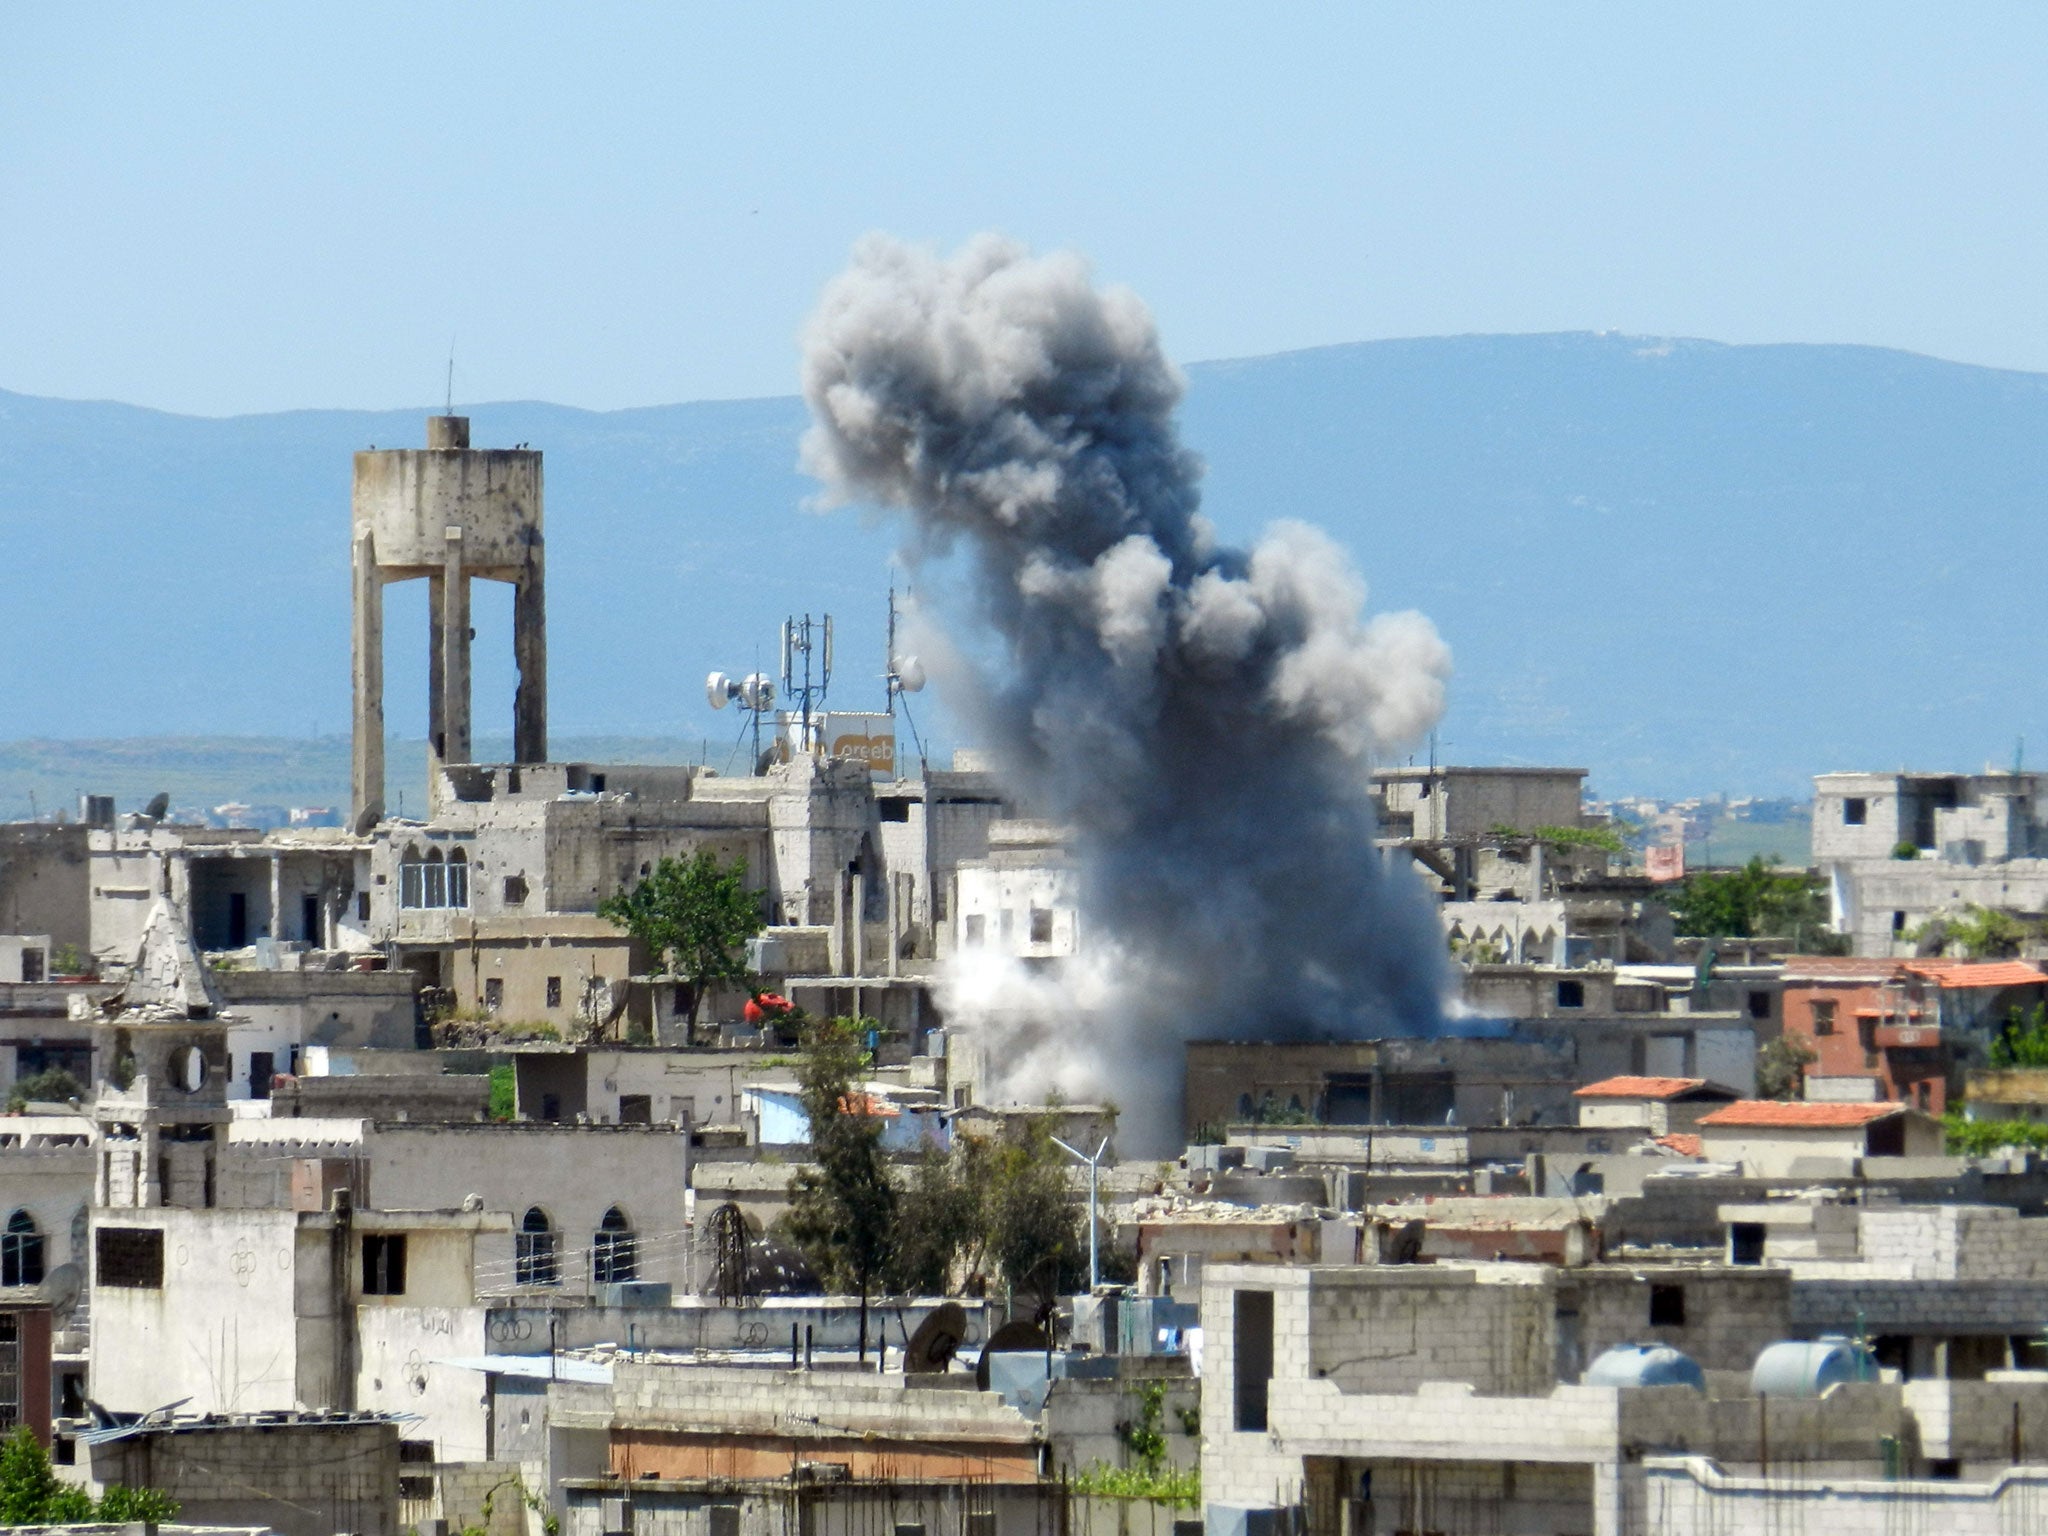 A picture taken on April 26, 2013 shows smoke rising after shelling in Houla in Syria's Homs province. The opposition National Coalition has accused the regime of using chemical weapons in the northern province of Aleppo, in Homs in central Syria, and in rebel-held areas near Damascus.